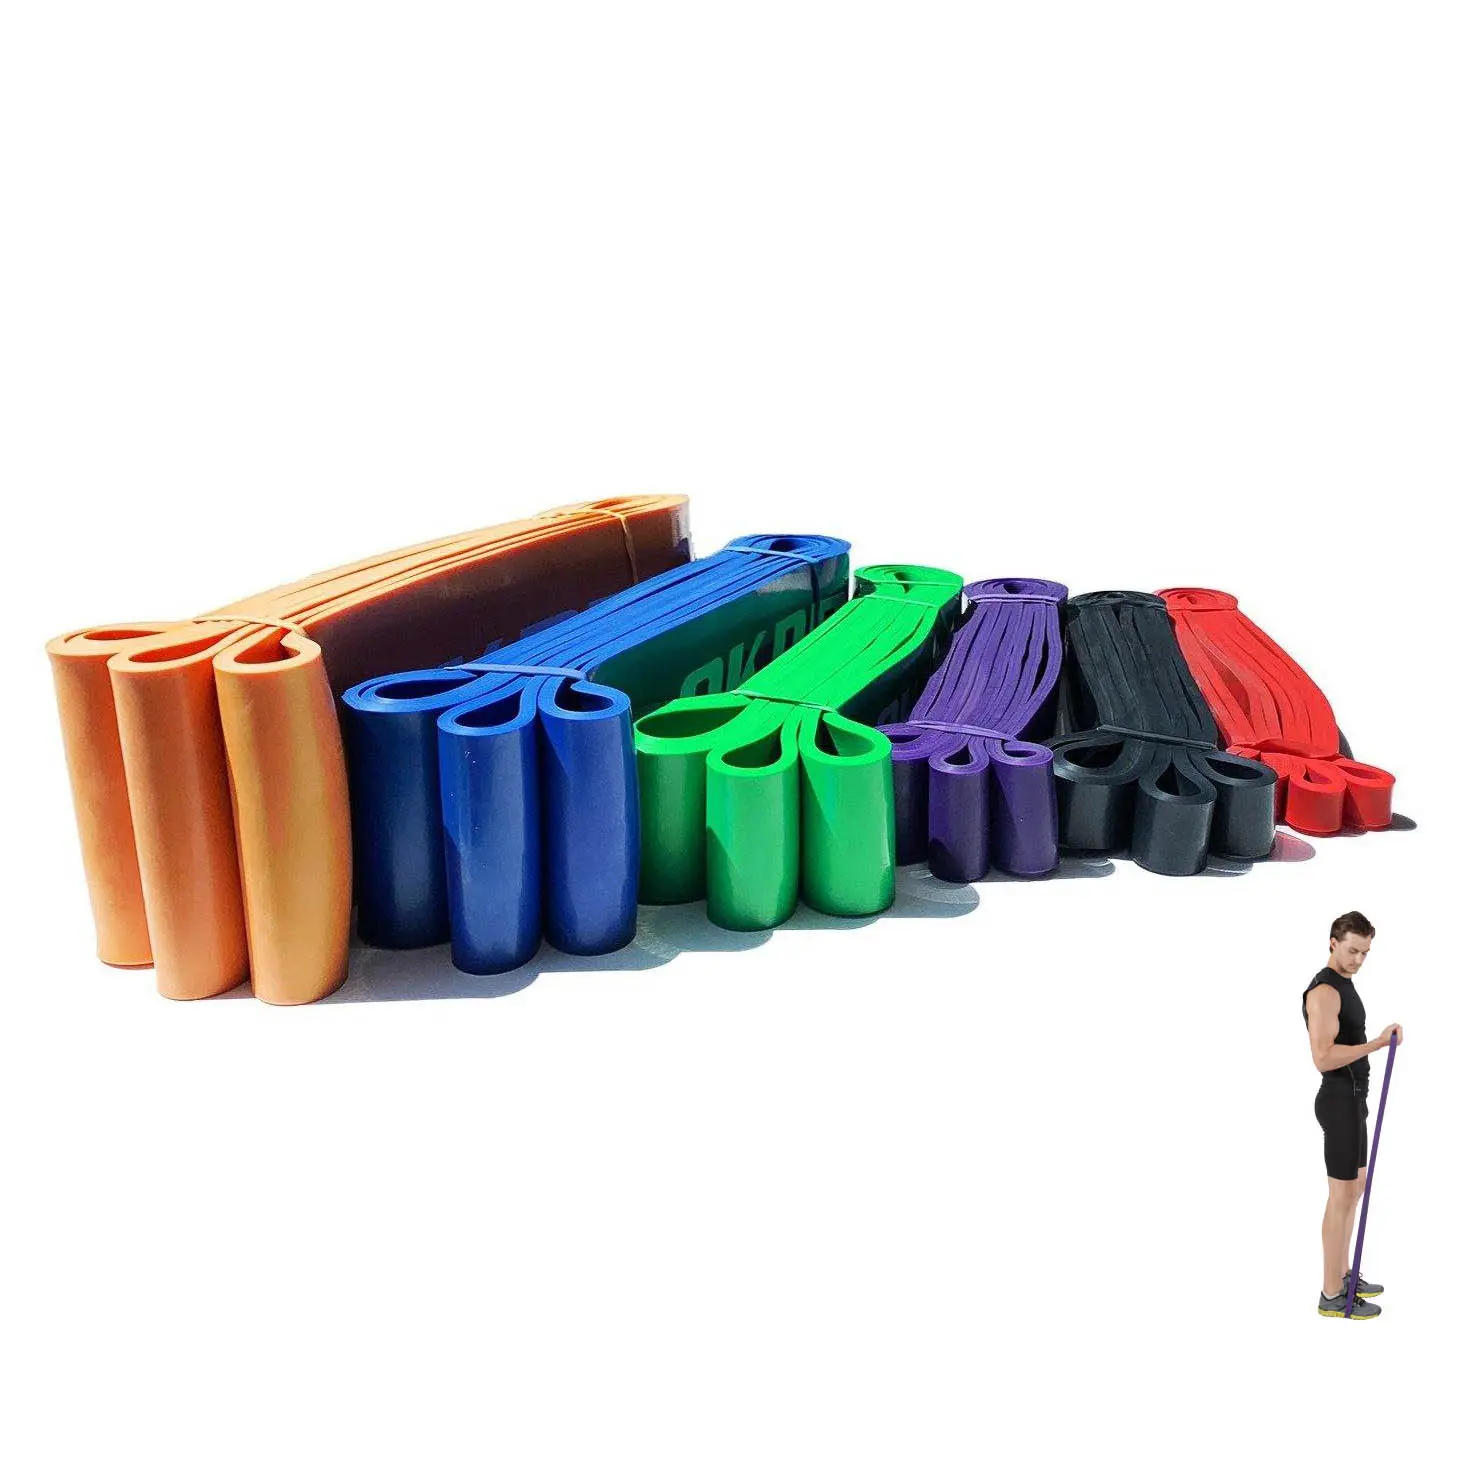 Make your Own Brand 5 Levels Resistance Band Elastic 41 Inch Fitness and Body Building Other Accessories Strength Training